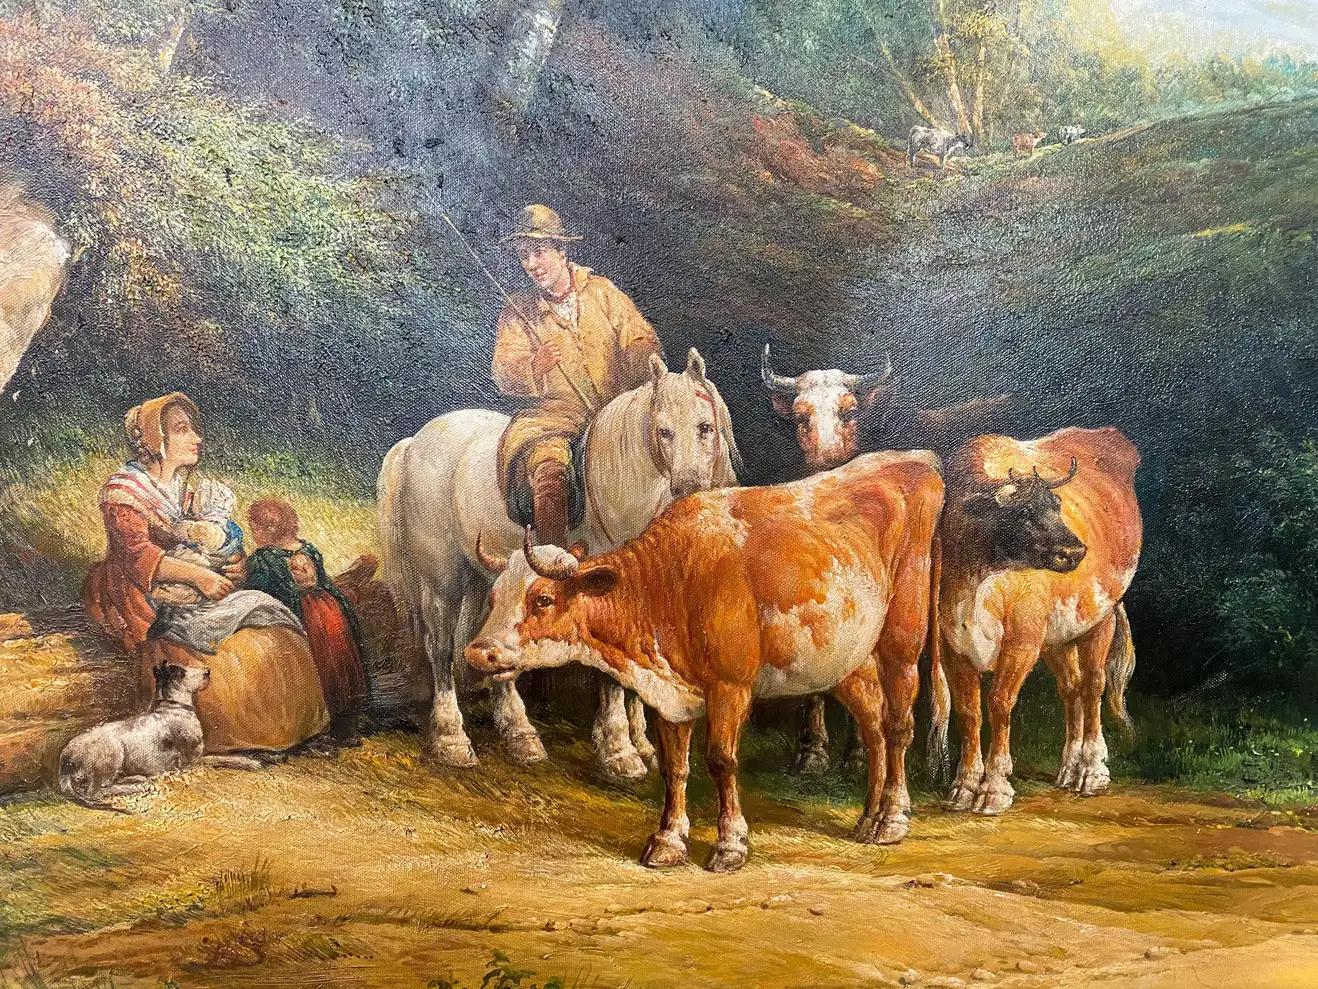 An exquisite large impressionistic painting of farmers with cattle in the manner of Julius Paul Junghanns (German, 1876-1958). The painting depicts a farmers' family with their dog and cattle resting in the middle of the woods surrounded by large